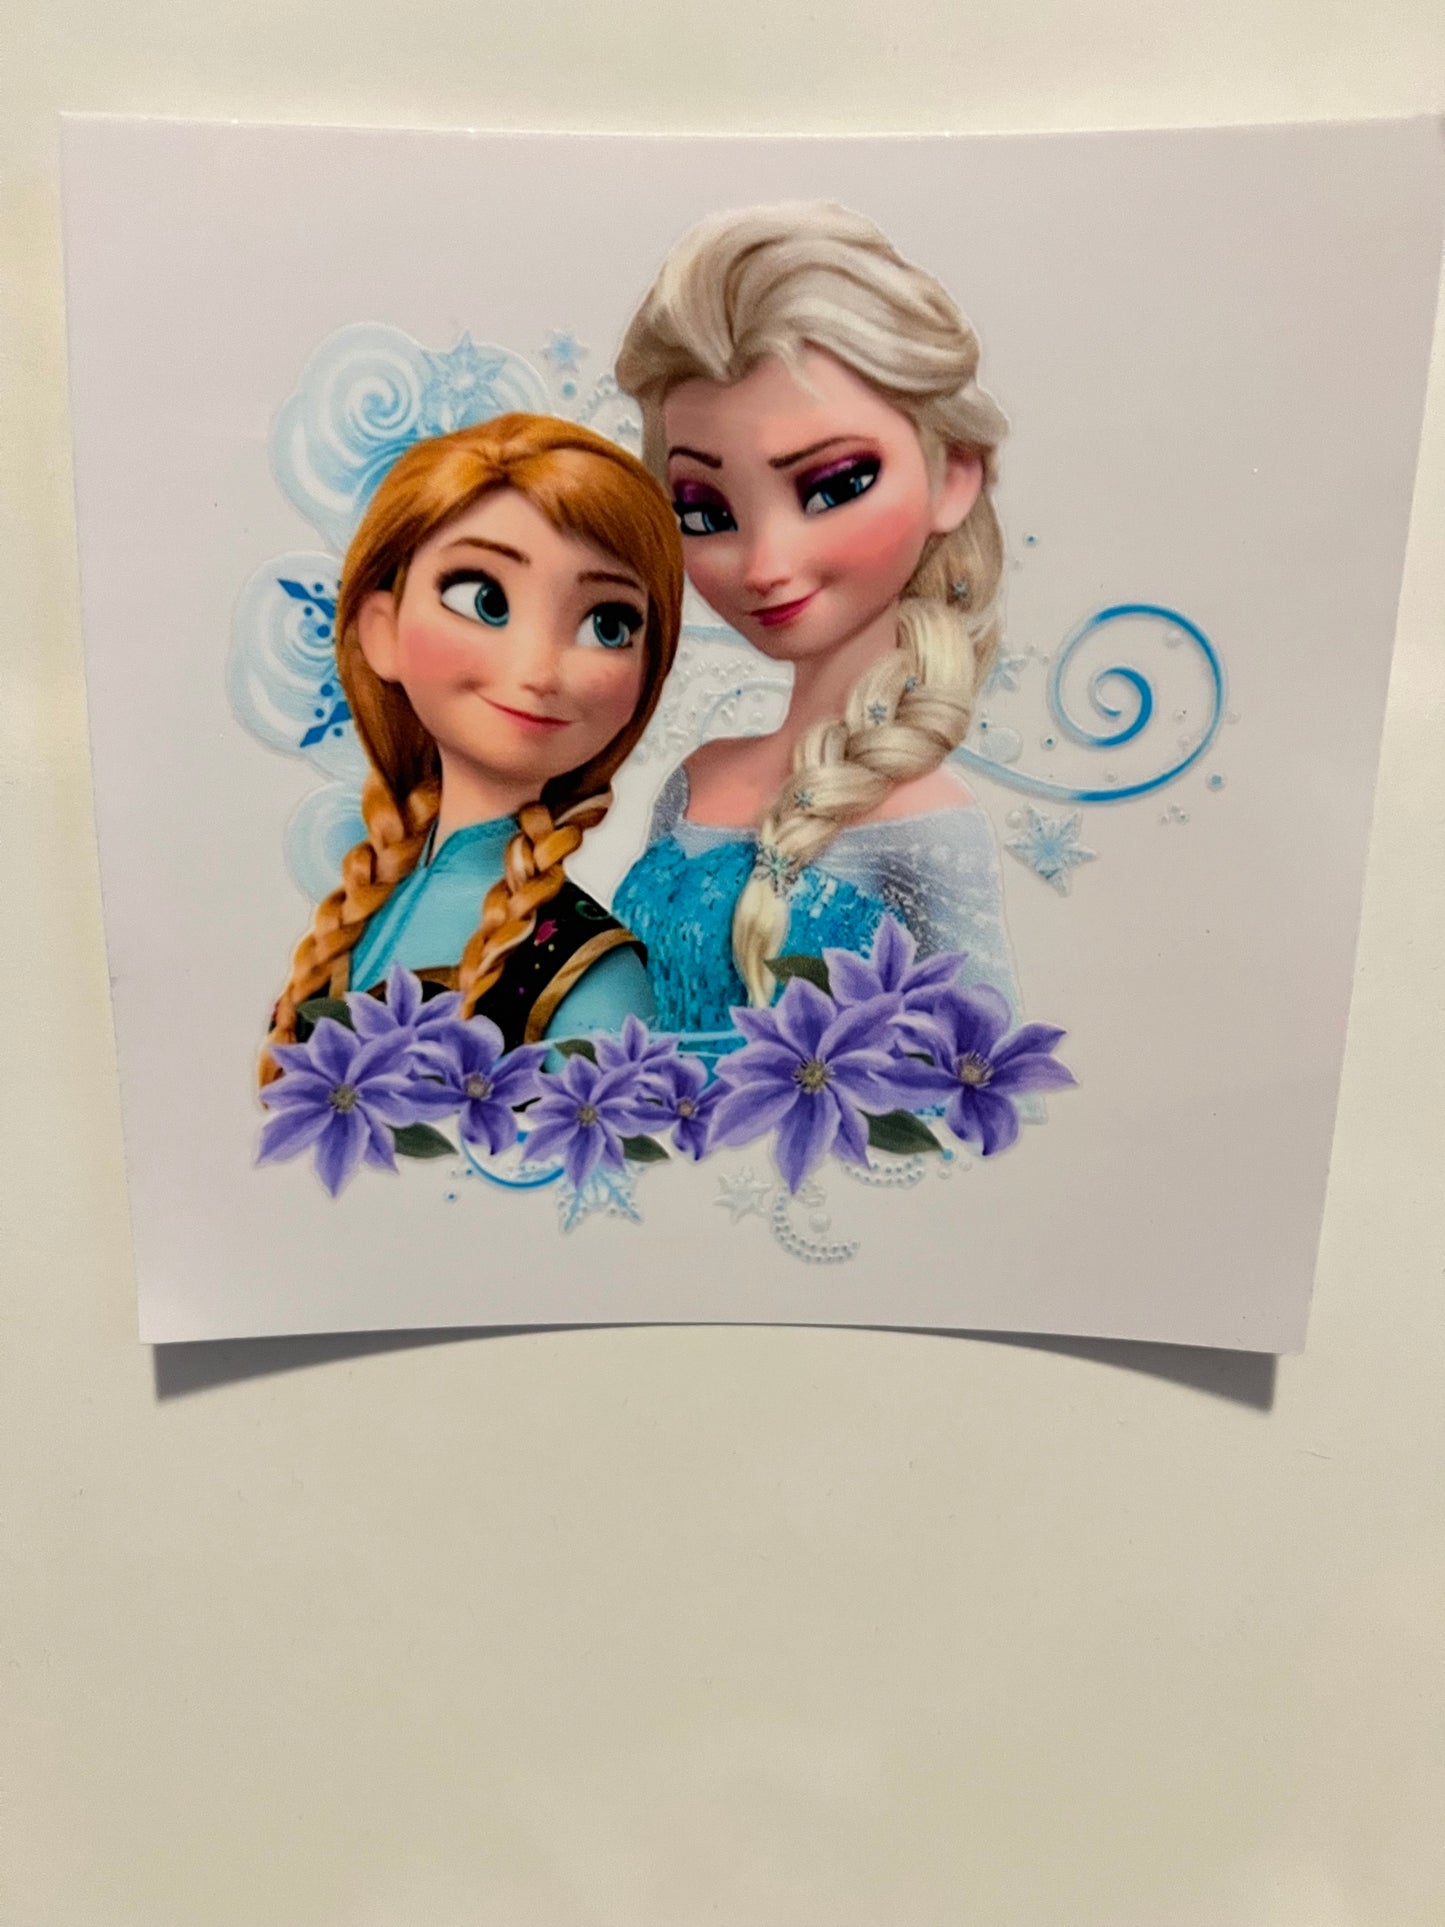 Frozen decal – House of Wraps